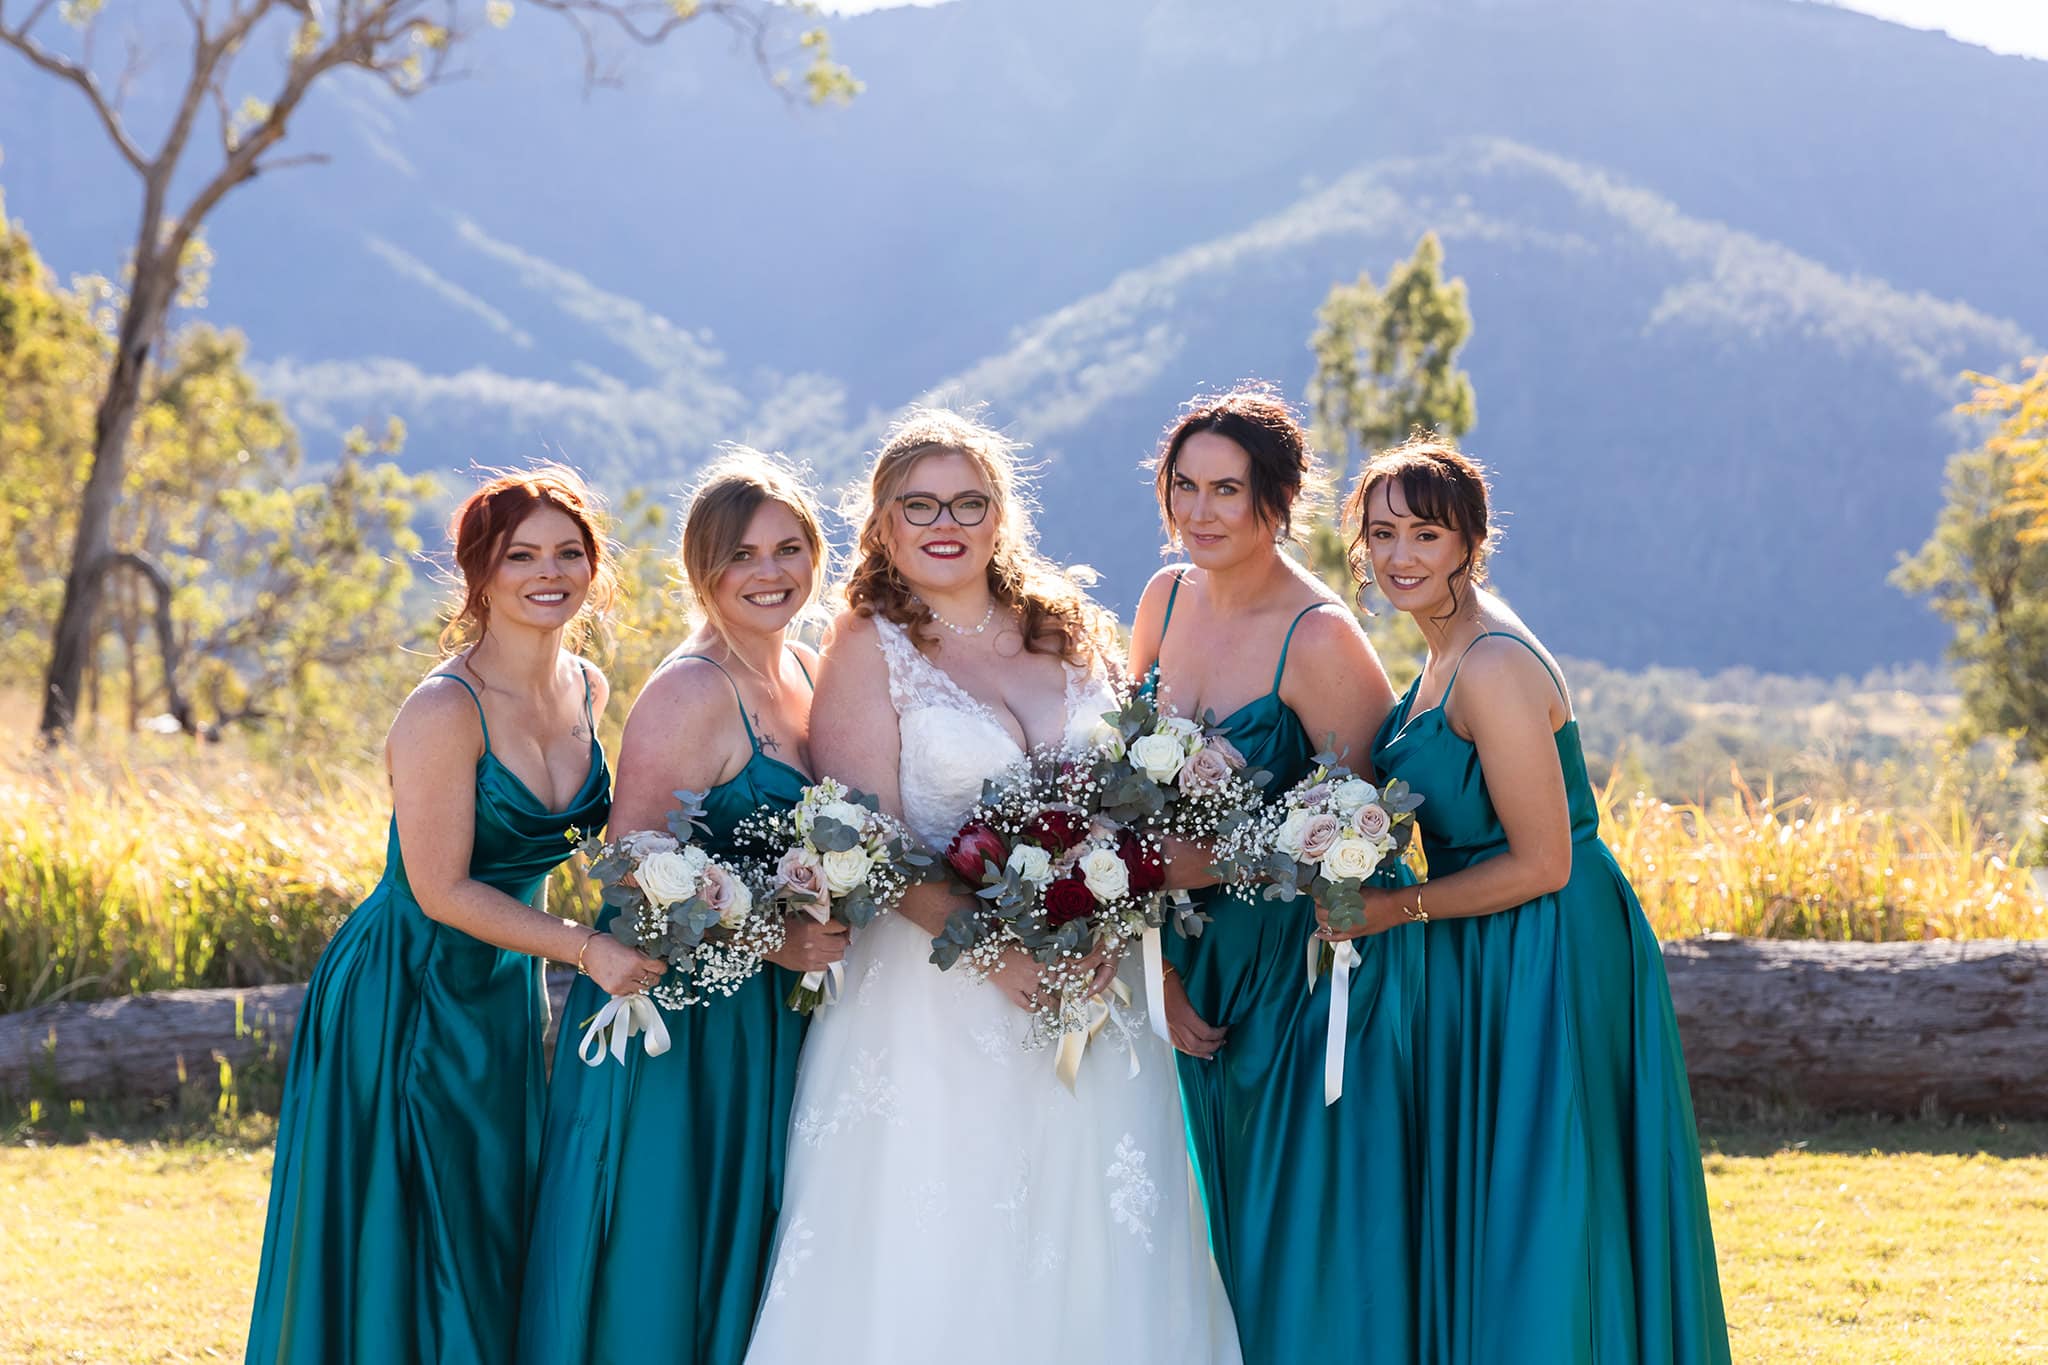 Bridal party at Laurenvale Estate in Aratula, Scenic Rim, by Mooi Photography.